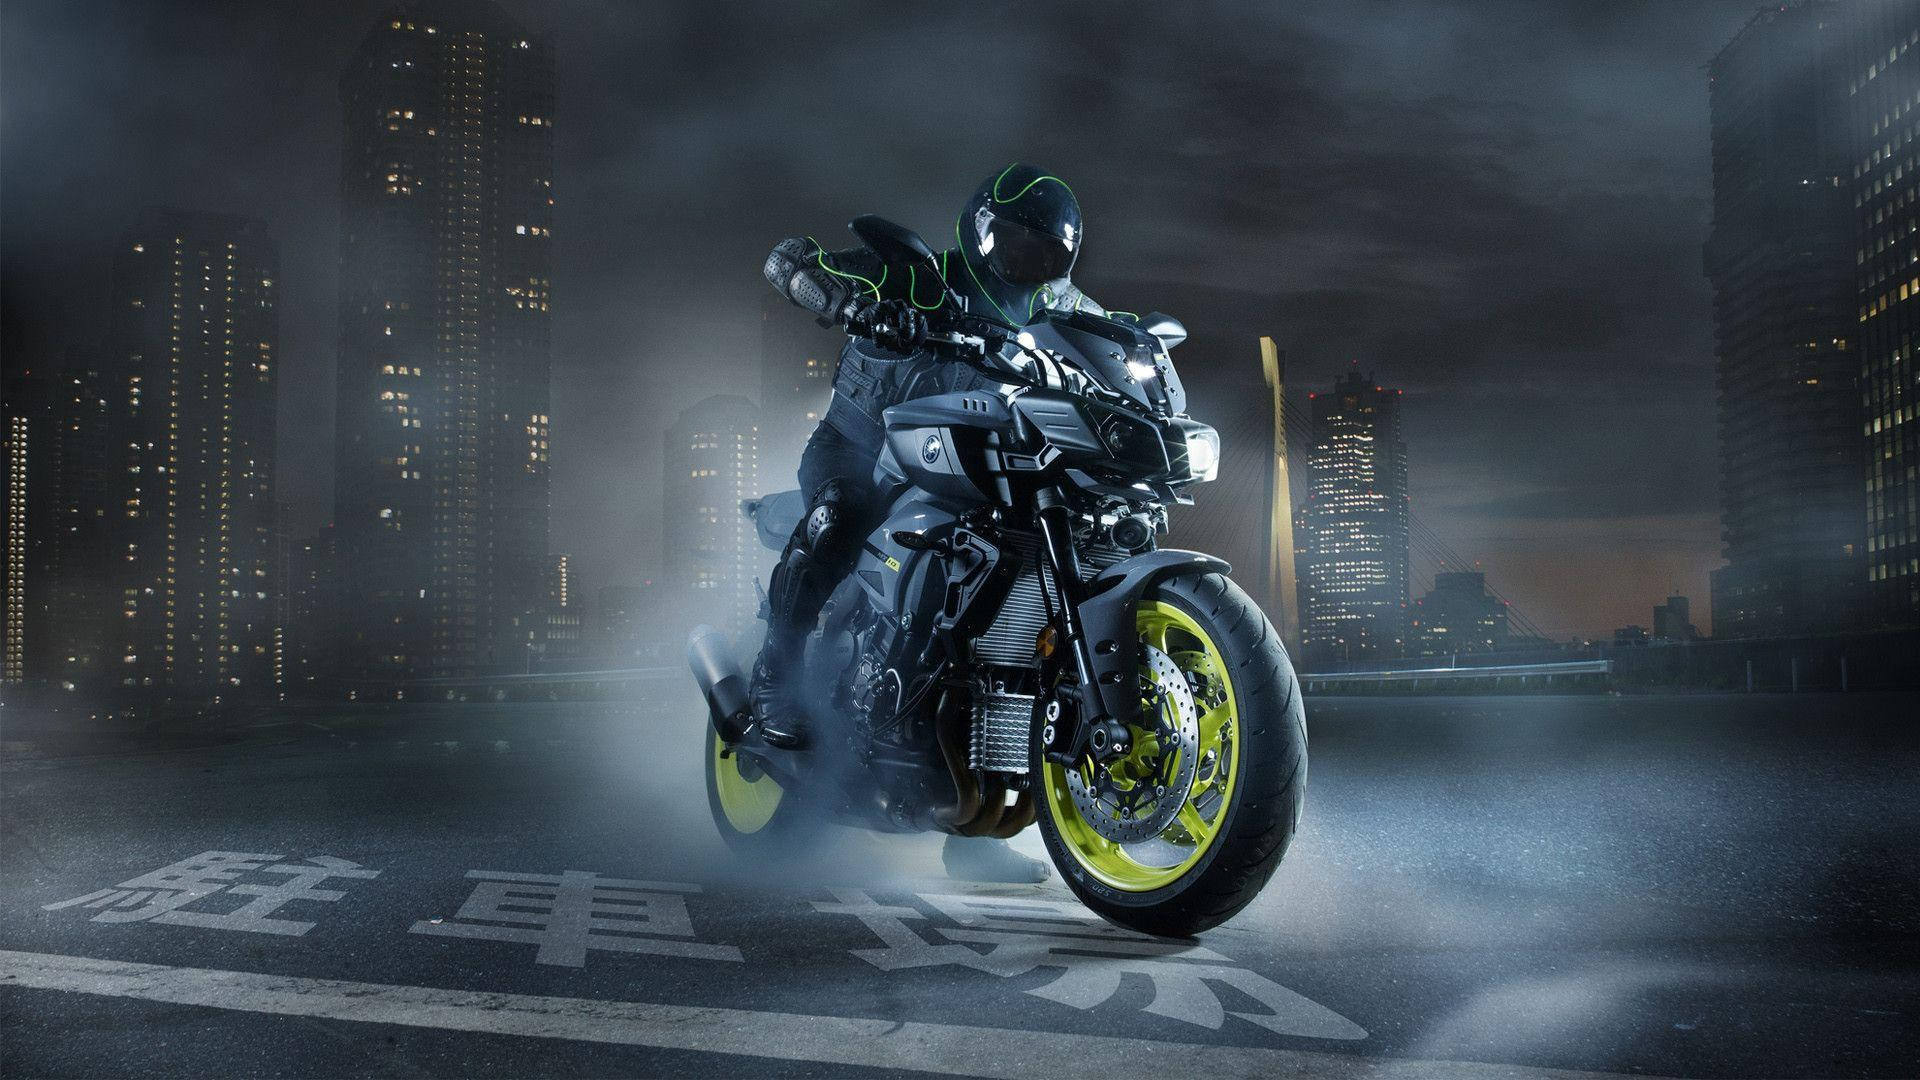 Thrilling Ride On The Yamaha Mt 15 Motorcycle